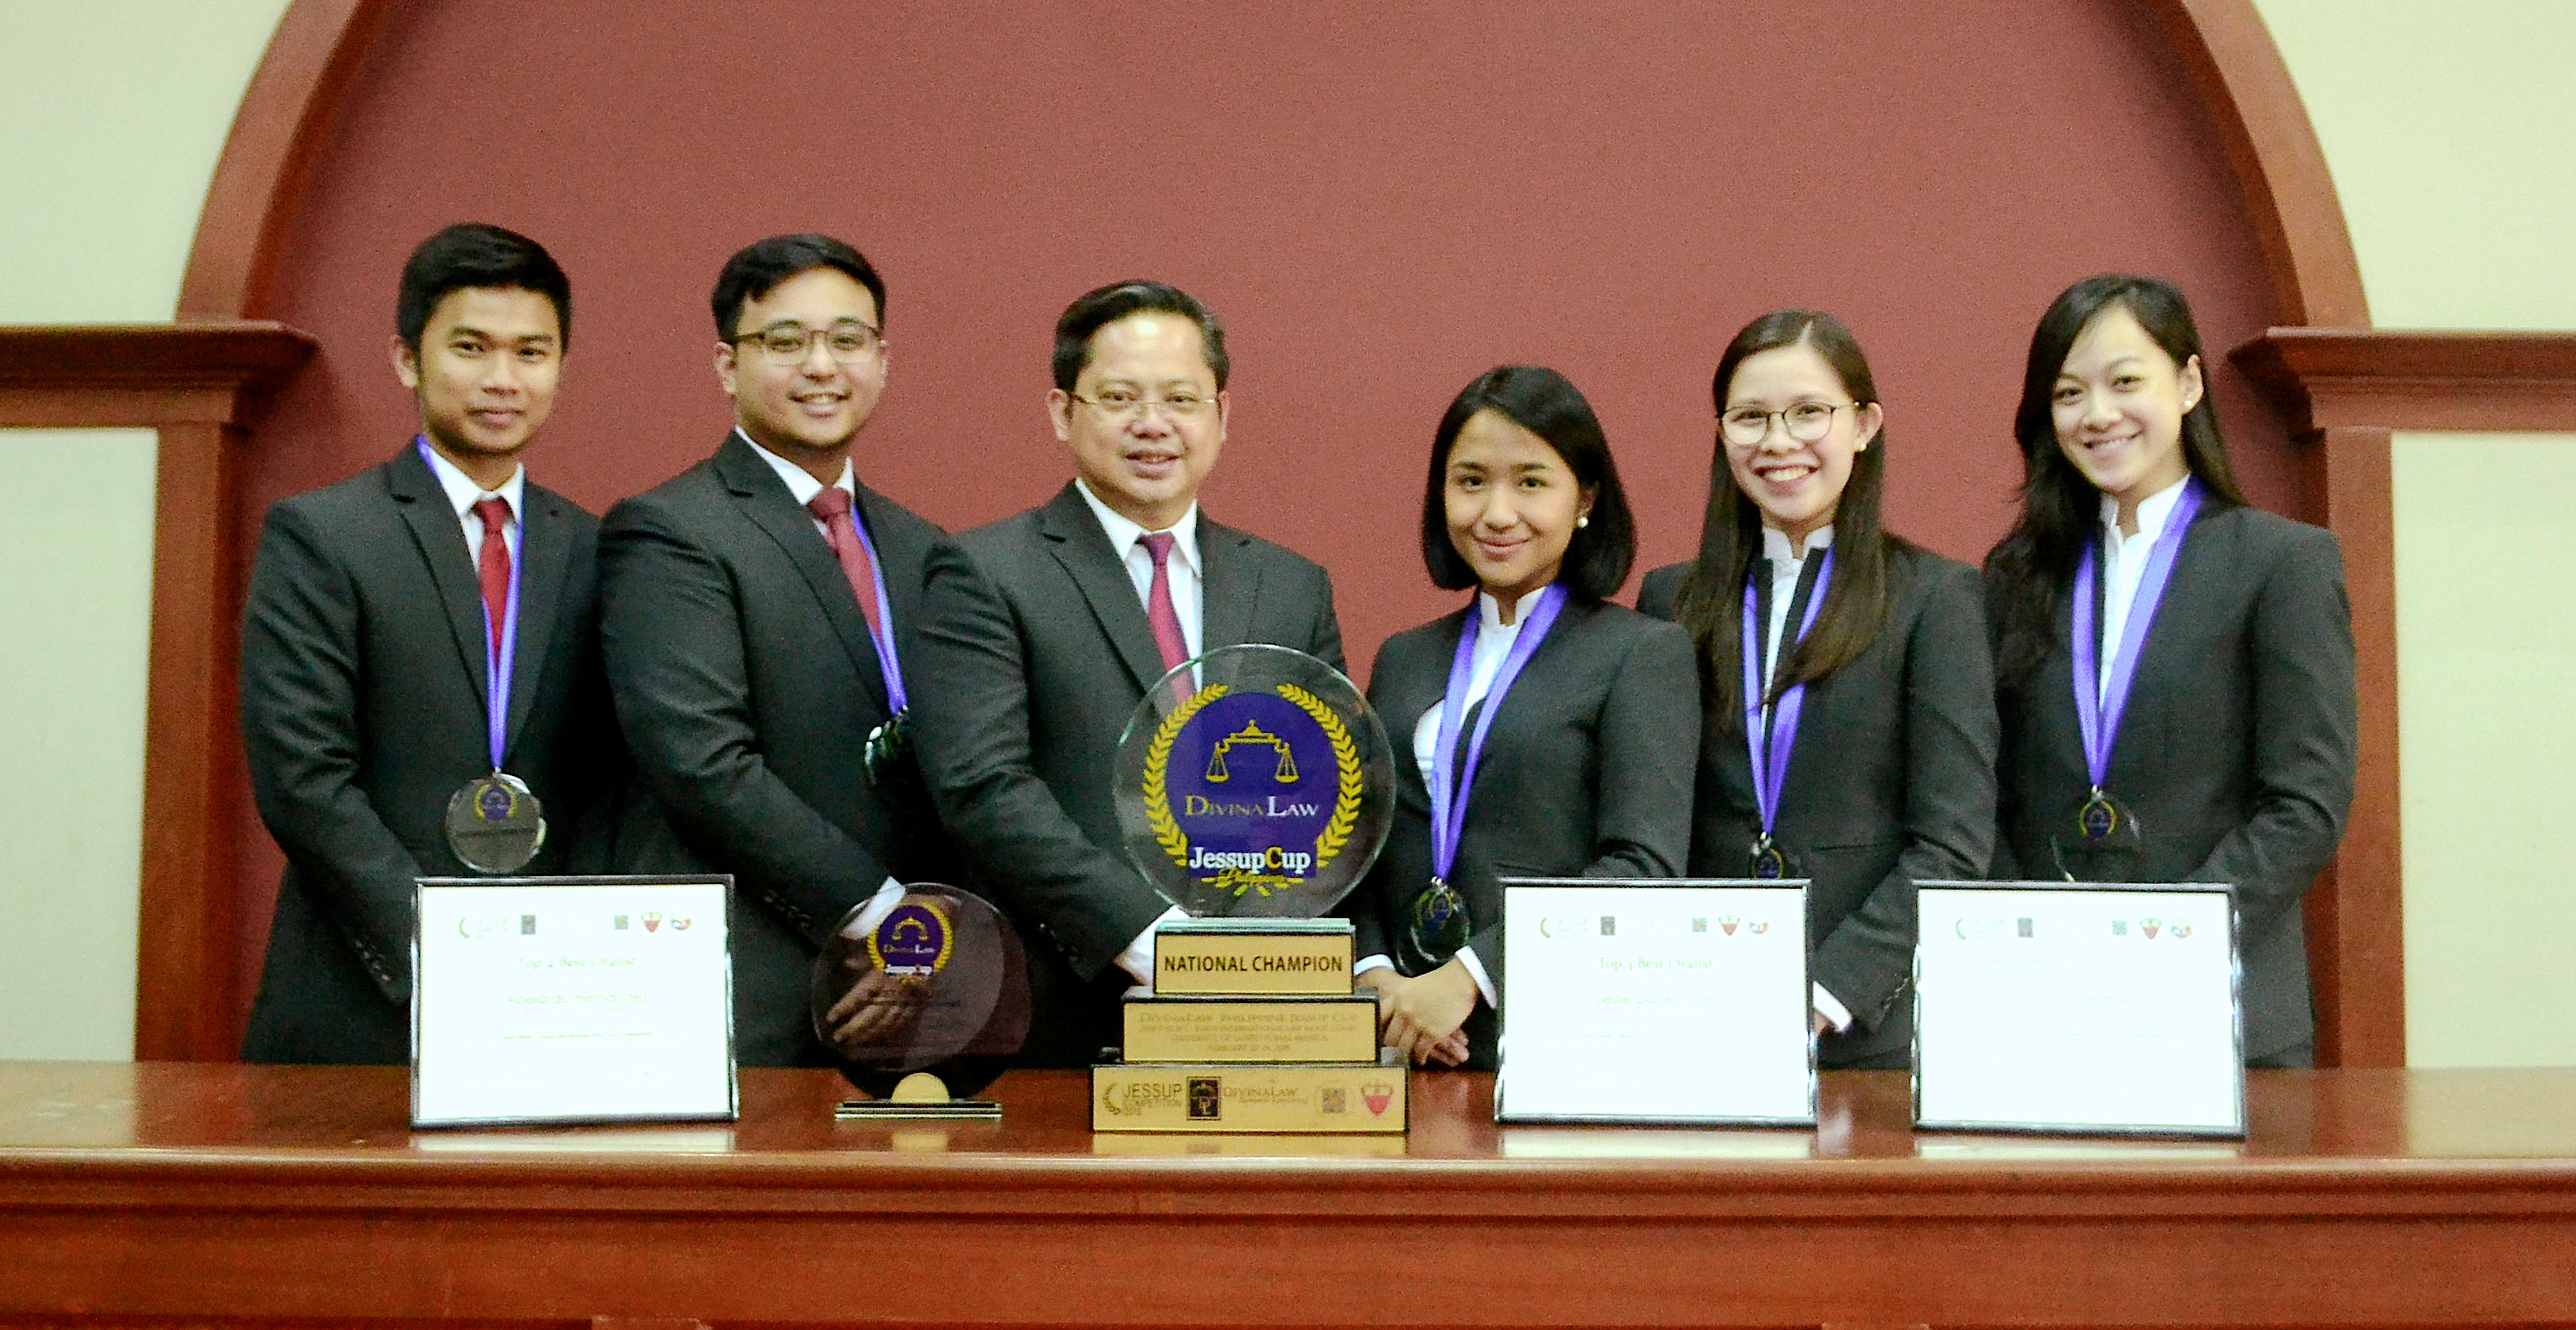 2020 “After Jessup” International Moot Court Champions